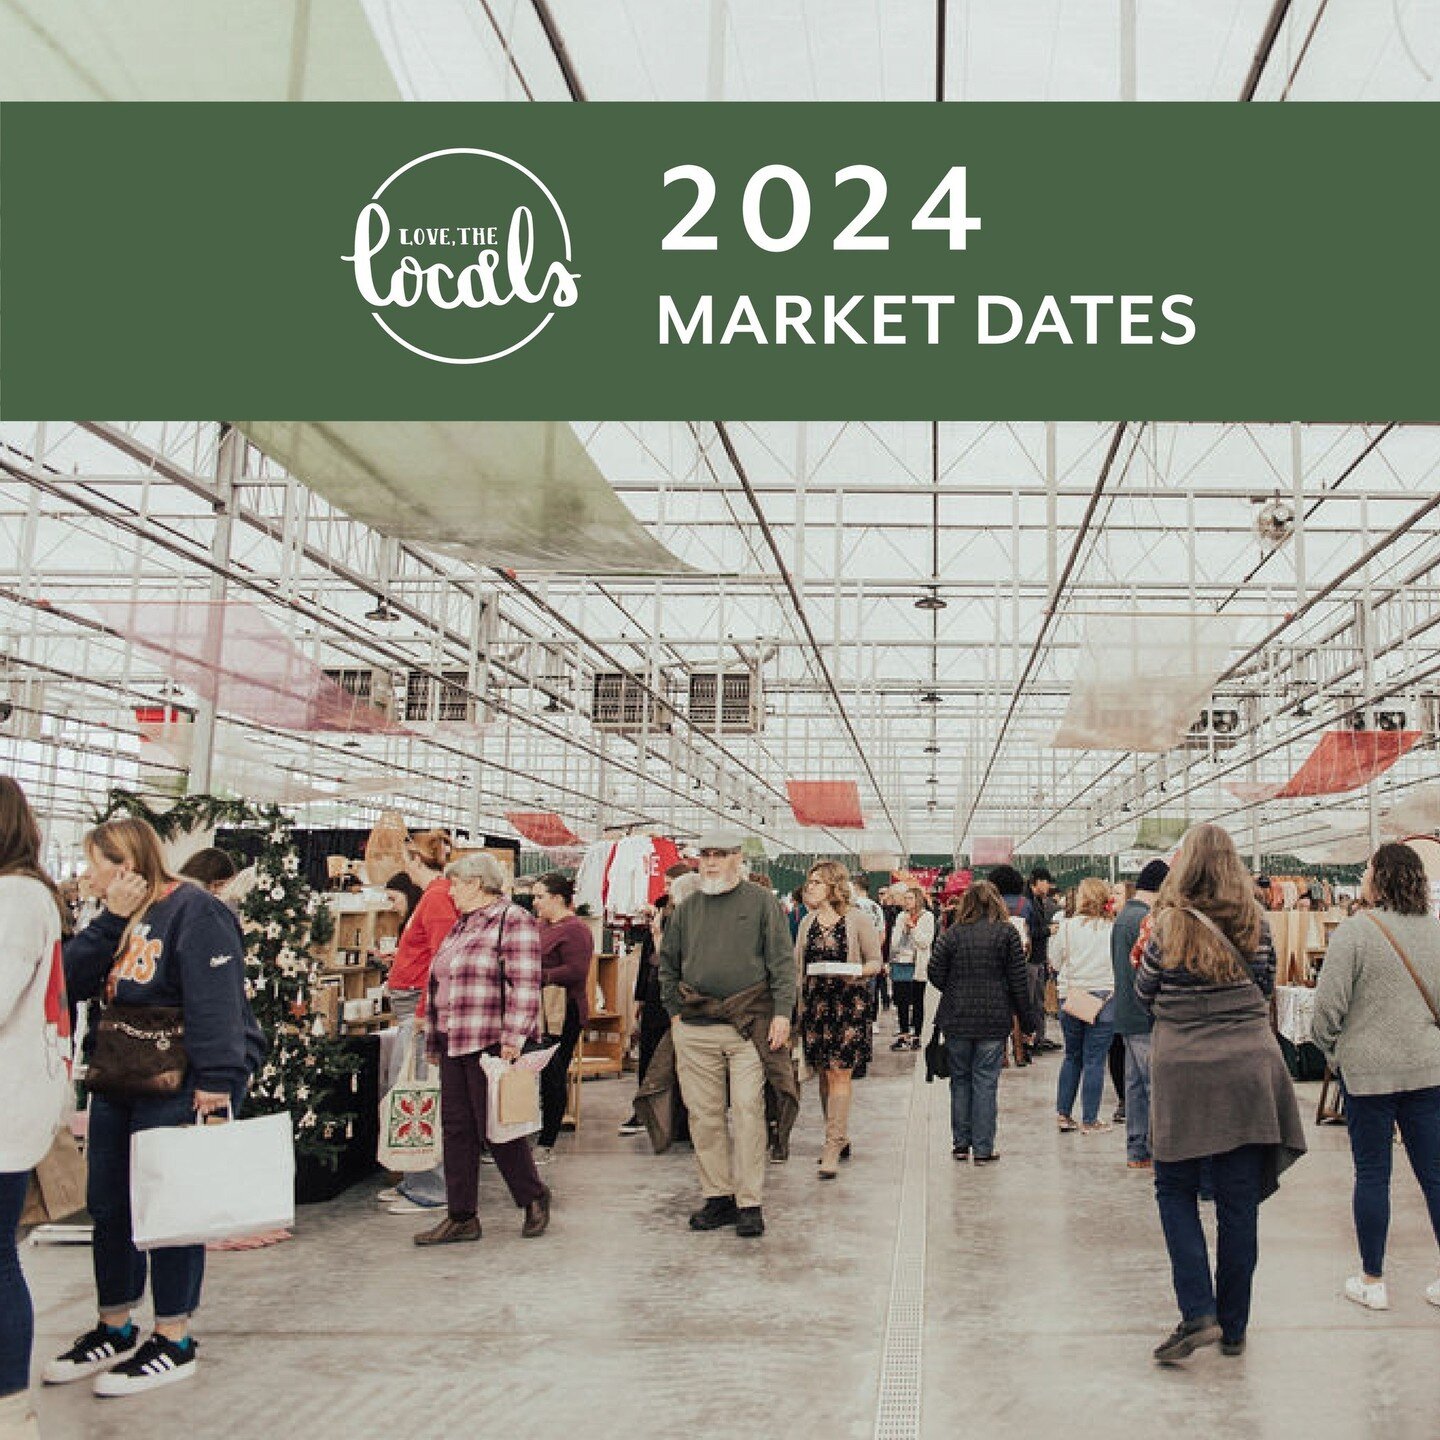 ⭐️Save the Dates 2024!⭐️⁠
⁠
We've already been planning and prepping for our 2024 market events! We can't wait for you to join us again this year. Save these dates in your calendar now!⁠
⁠
🍎🗓️ Saturday, September 21st - Sunday, September 22nd⁠
Appl